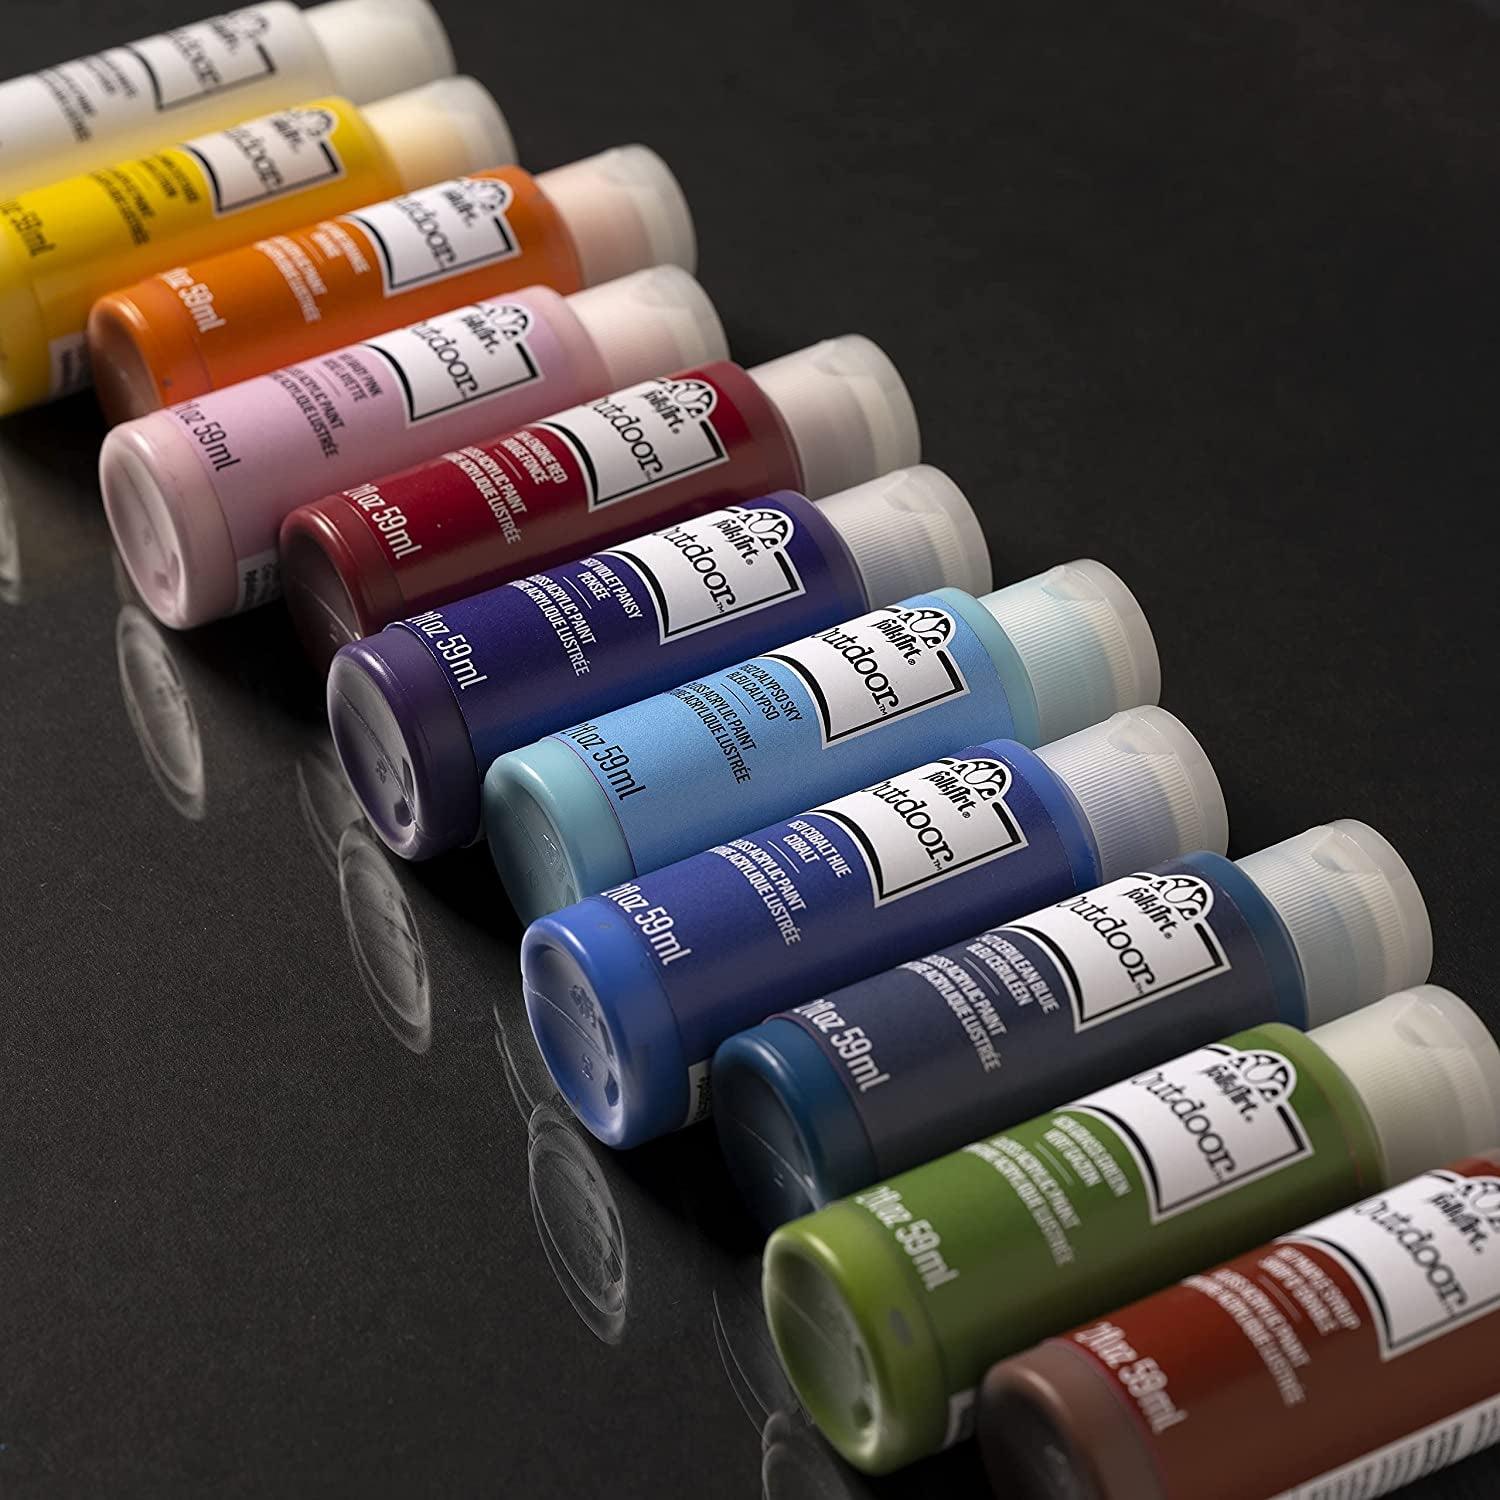 FolkArt Outdoor Gloss Acrylic Craft Paint Set Designed for